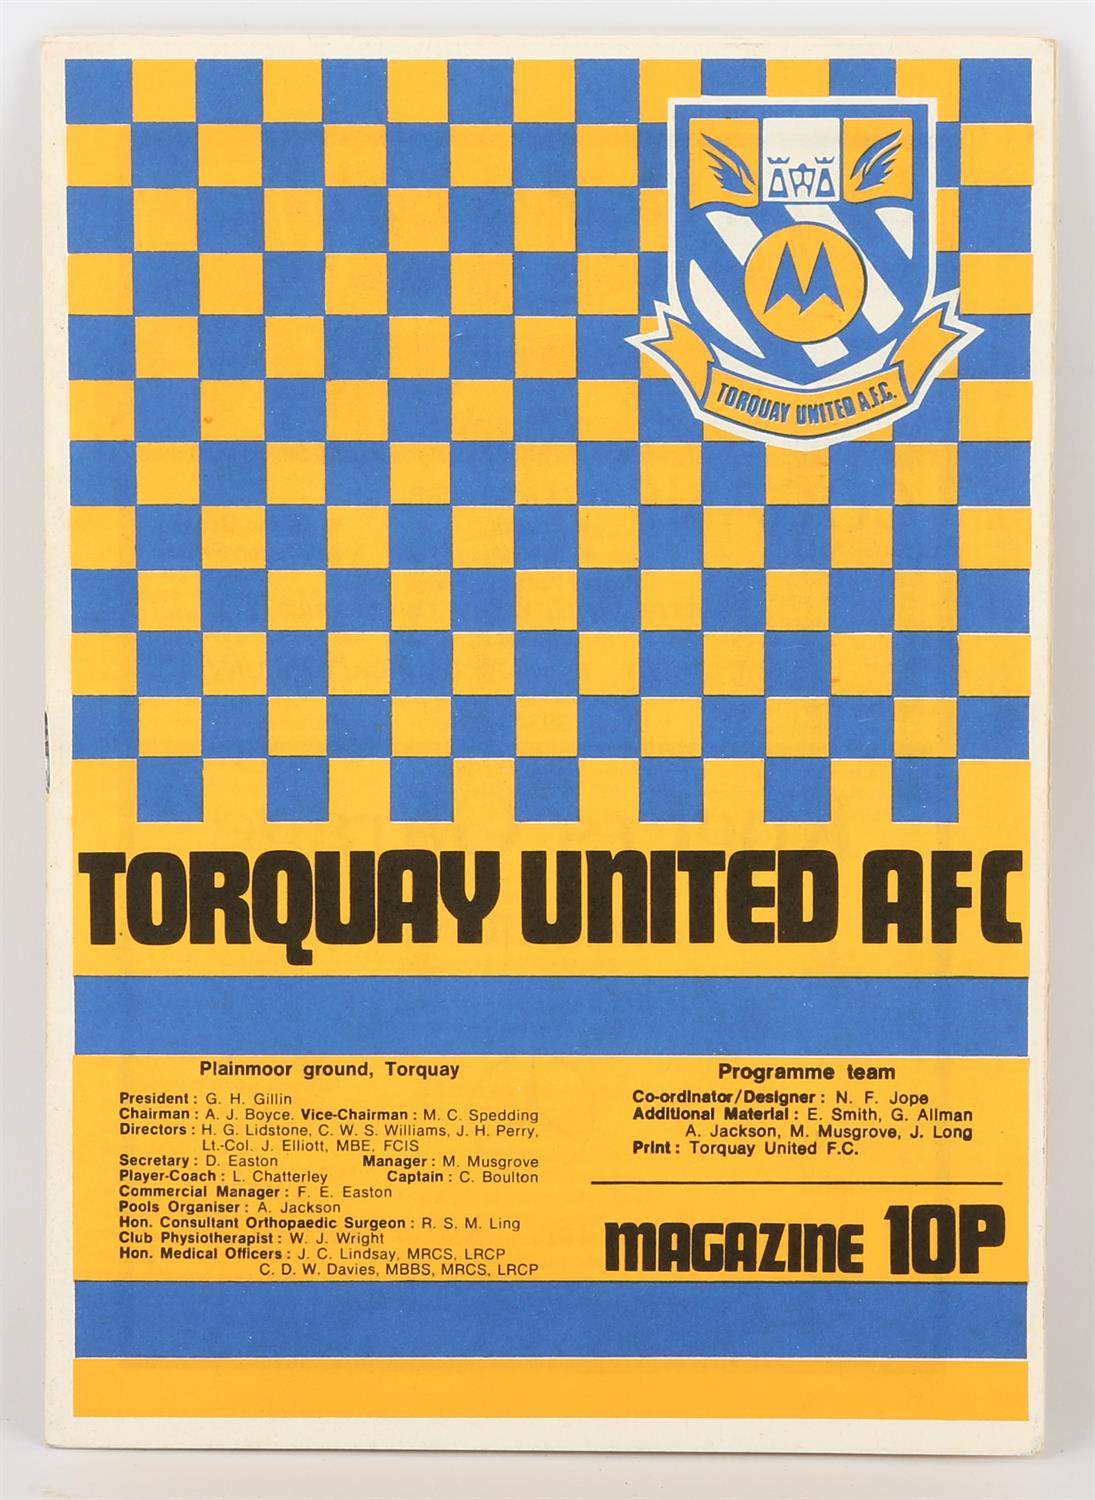 Sex Pistols - Torquay United AFC Programme 1976, with a black and white printed centre flyer, - Image 2 of 2